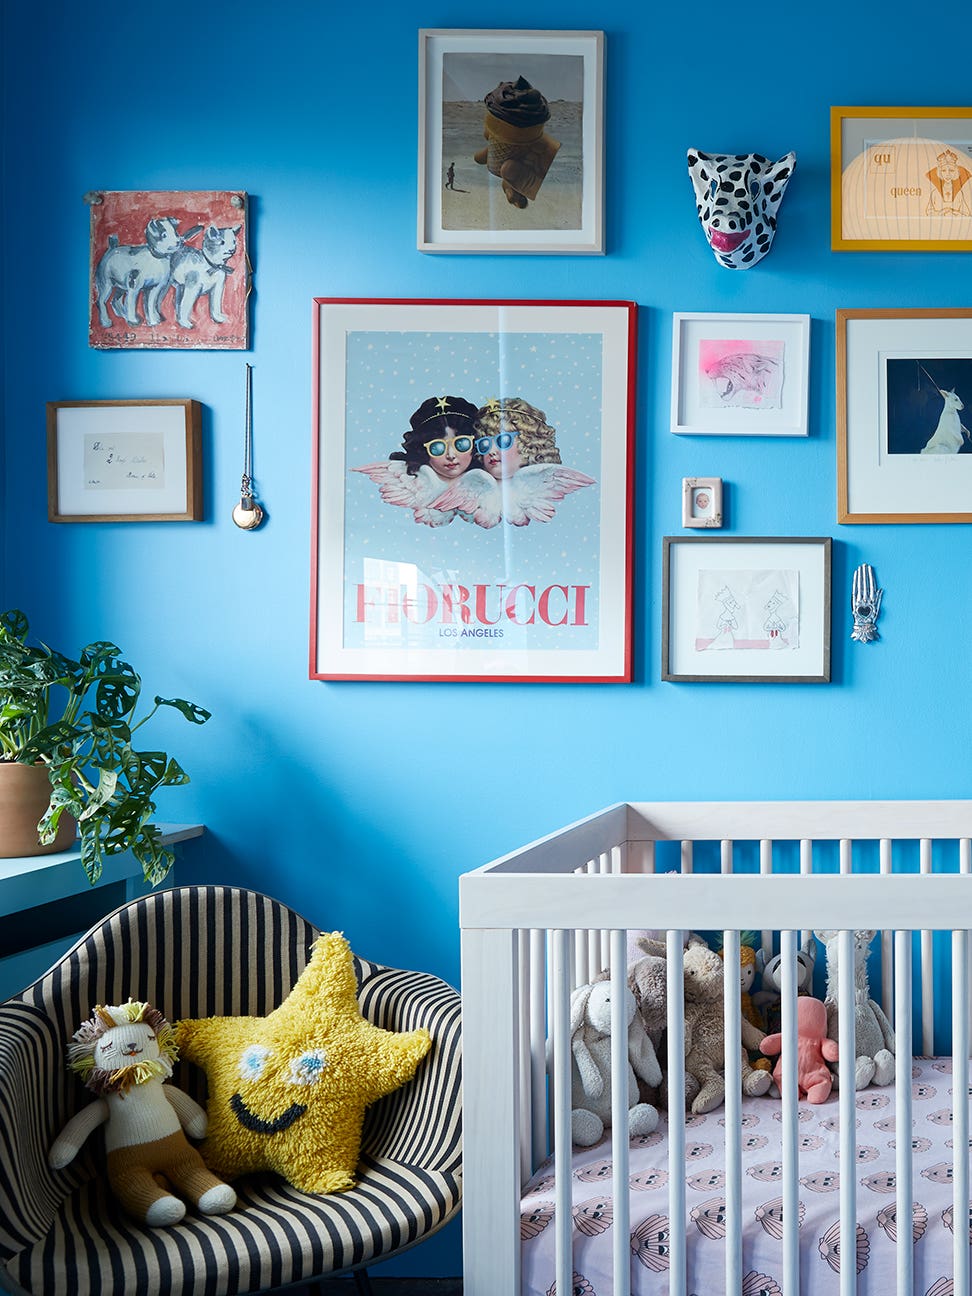 Electric Blue Paint Wasn’t Actually Piera Gelardi’s First Choice for Her Nursery